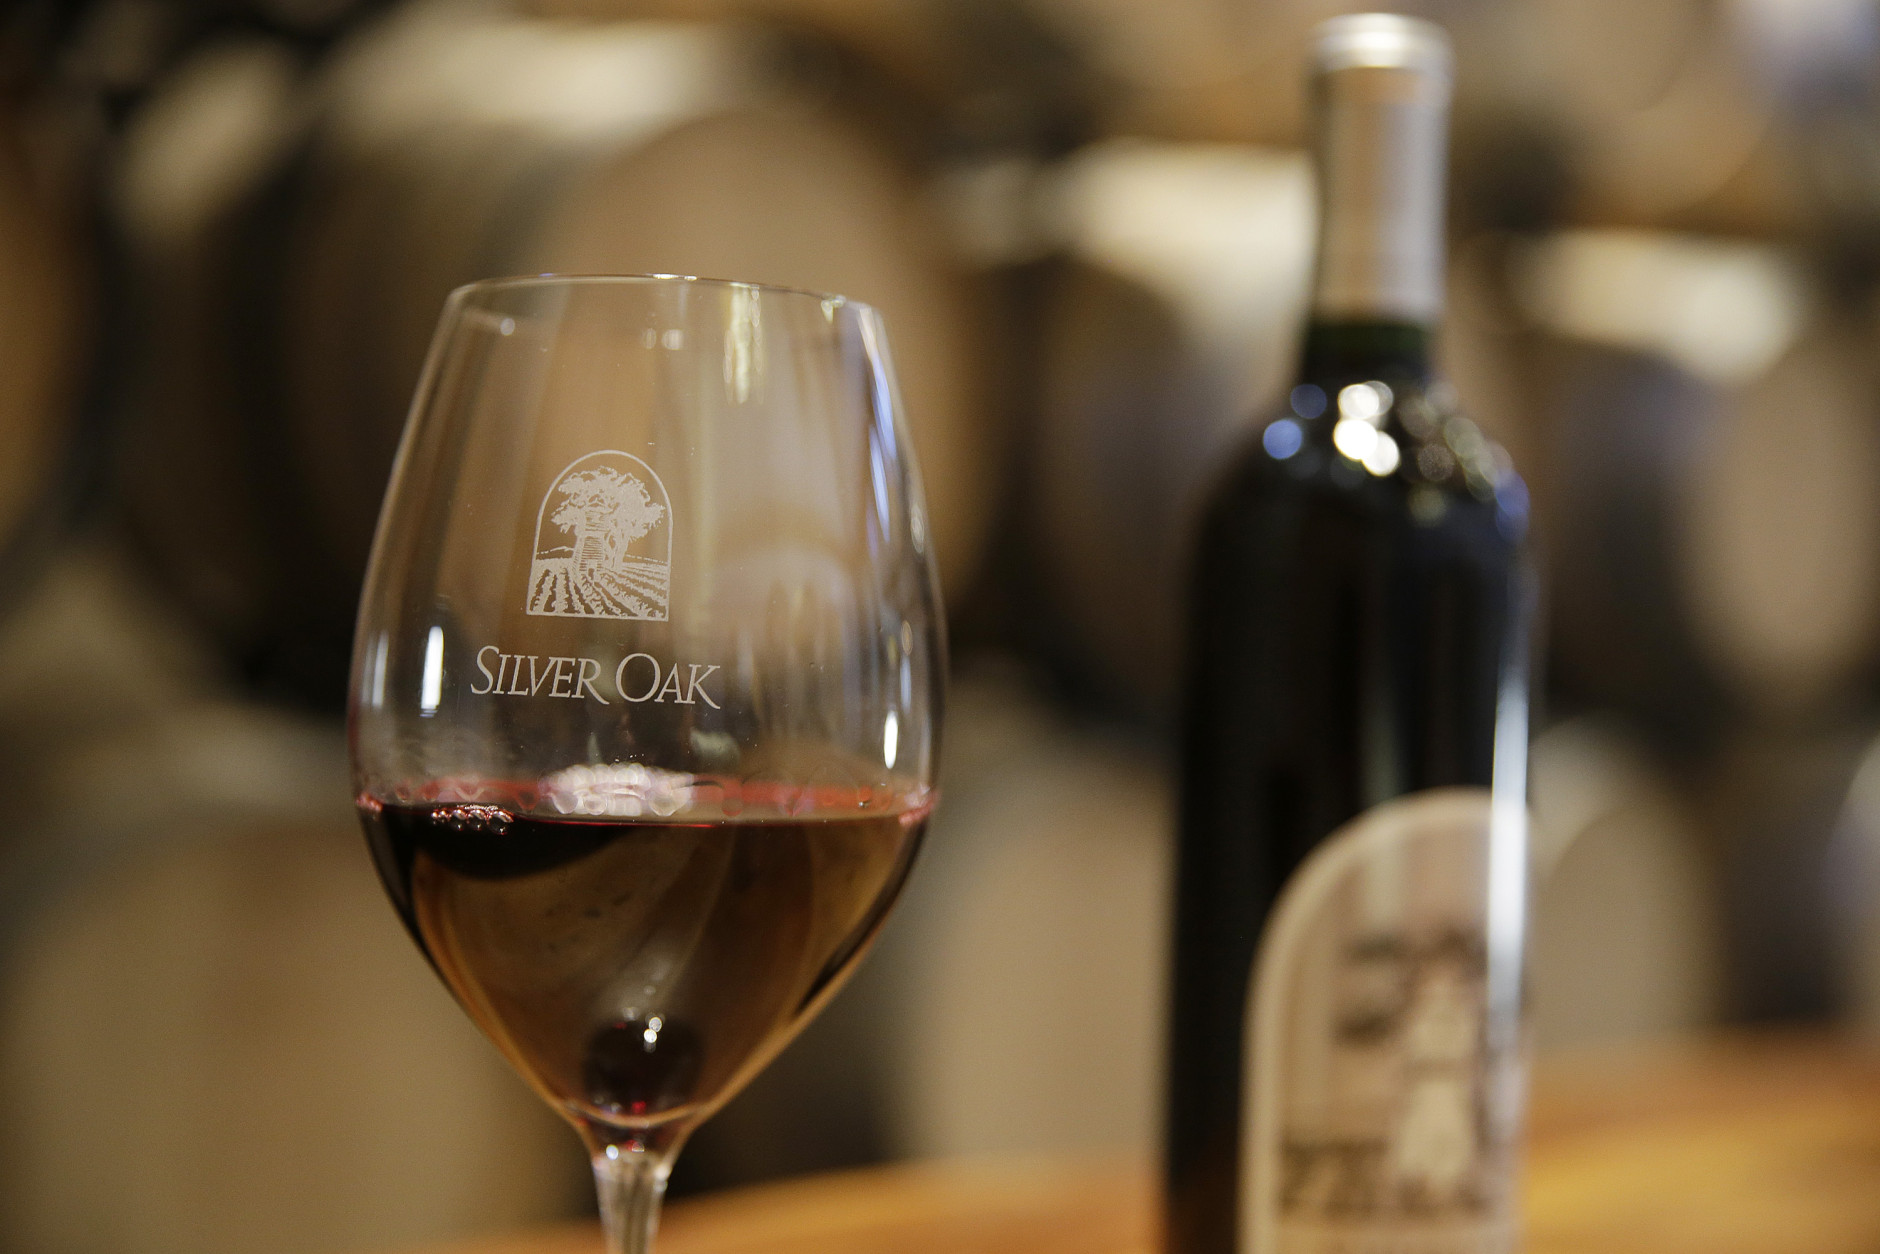 This Tuesday, March 3, 2015 photo shows a glass of Cabernet Sauvignon wine in front of American Oak barrels on display at Silver Oak Cellars in Oakville, Calif. (AP Photo/Eric Risberg)